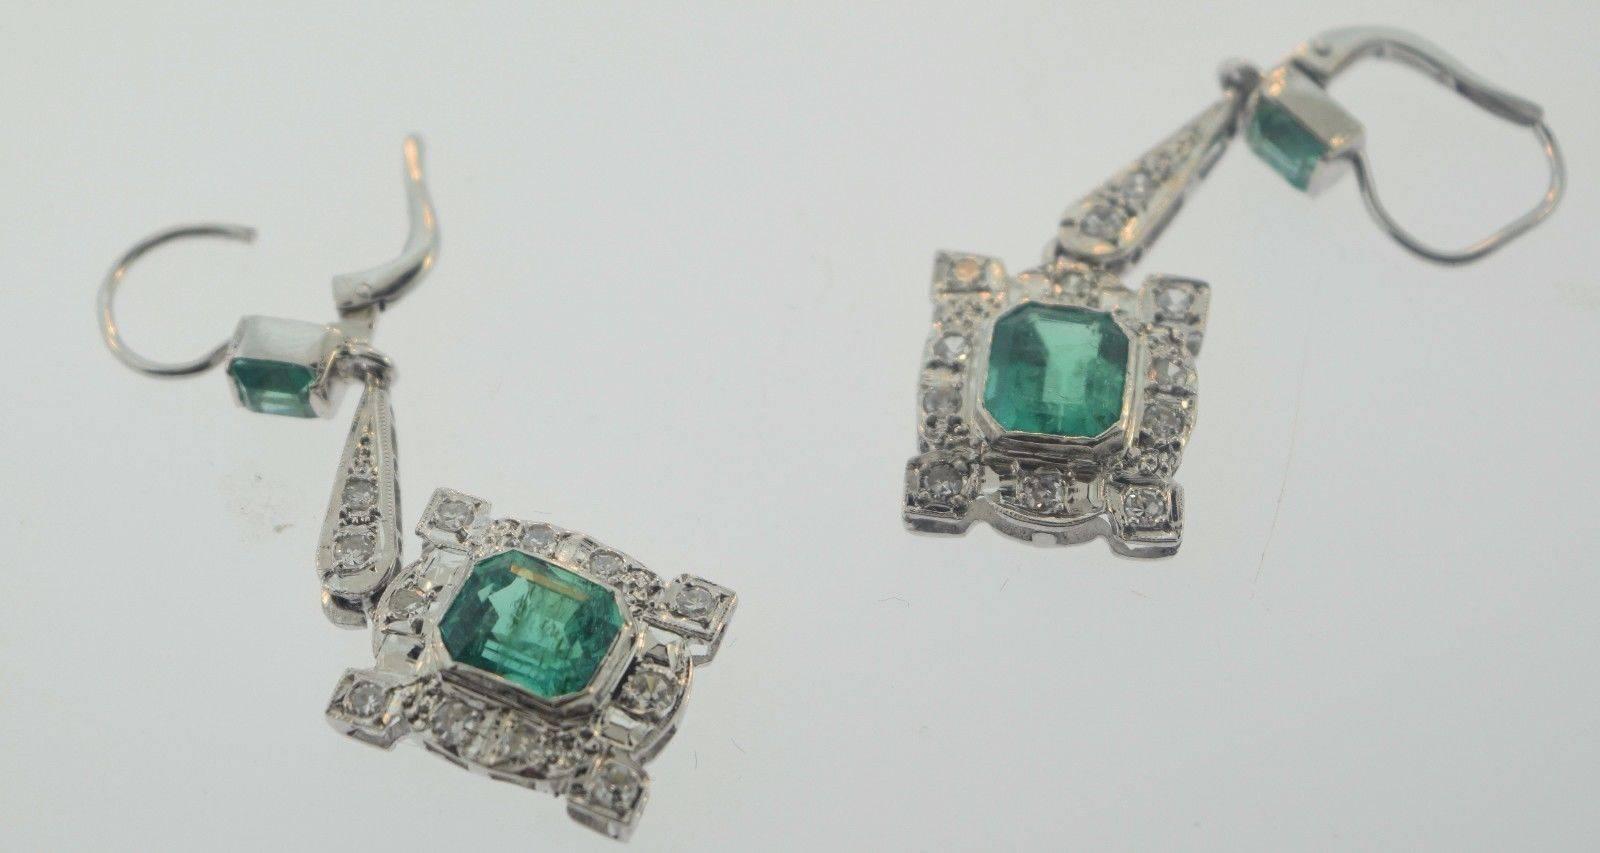 About the Item:
These delightful drop earrings feature elegant 8.25 x 7.30mm rectangular shaped Emerald gemstones suspended from 3.75x3.47mm rectangular shaped Emerald gemstones with sparkling 1.5 carat total weight Diamond accents all around. Set